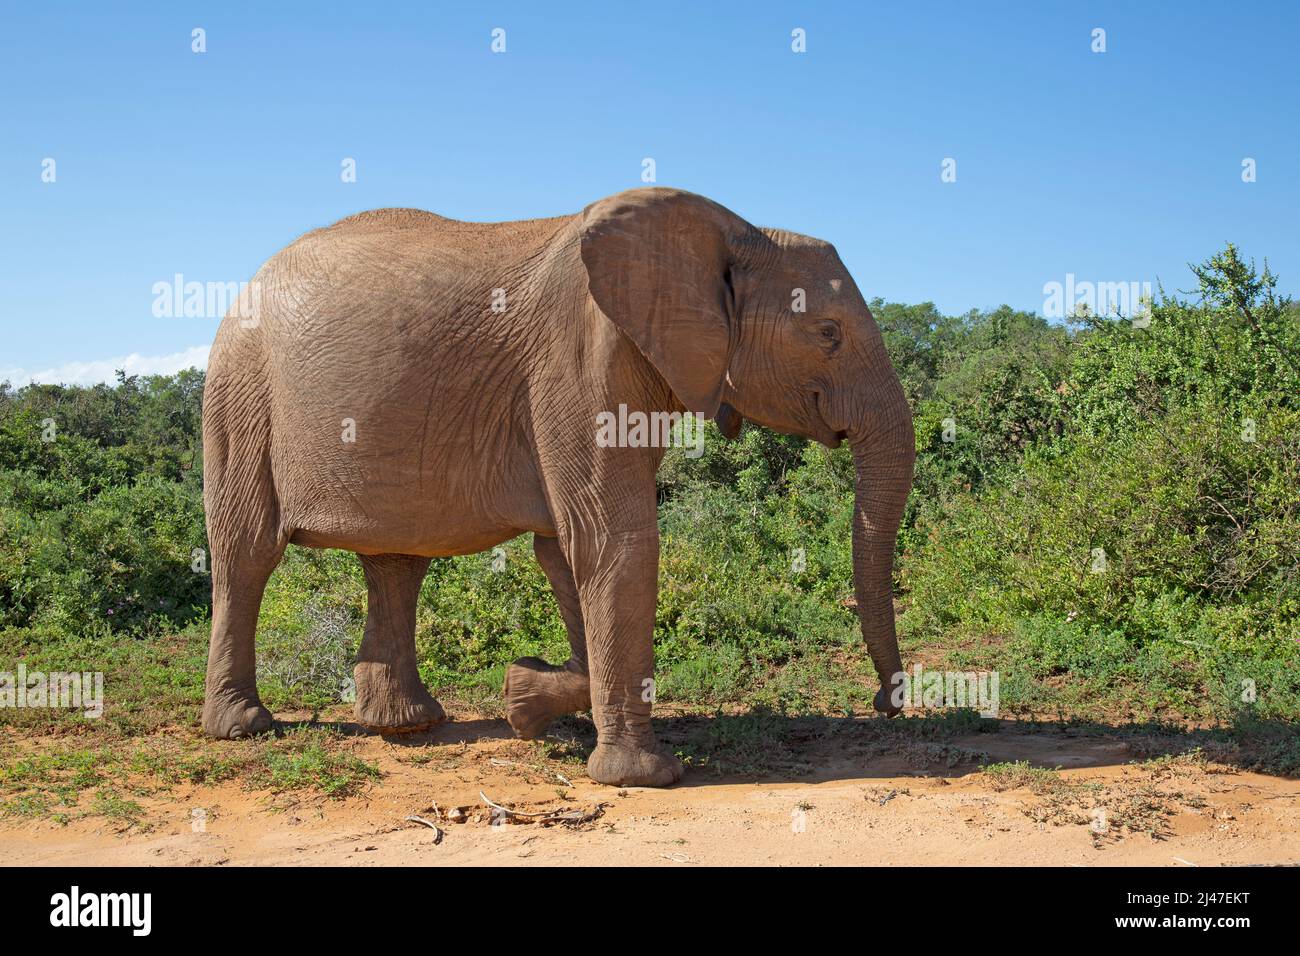 A large mature elephant, in the Addo Elephant Park, South Africa. Stock Photo